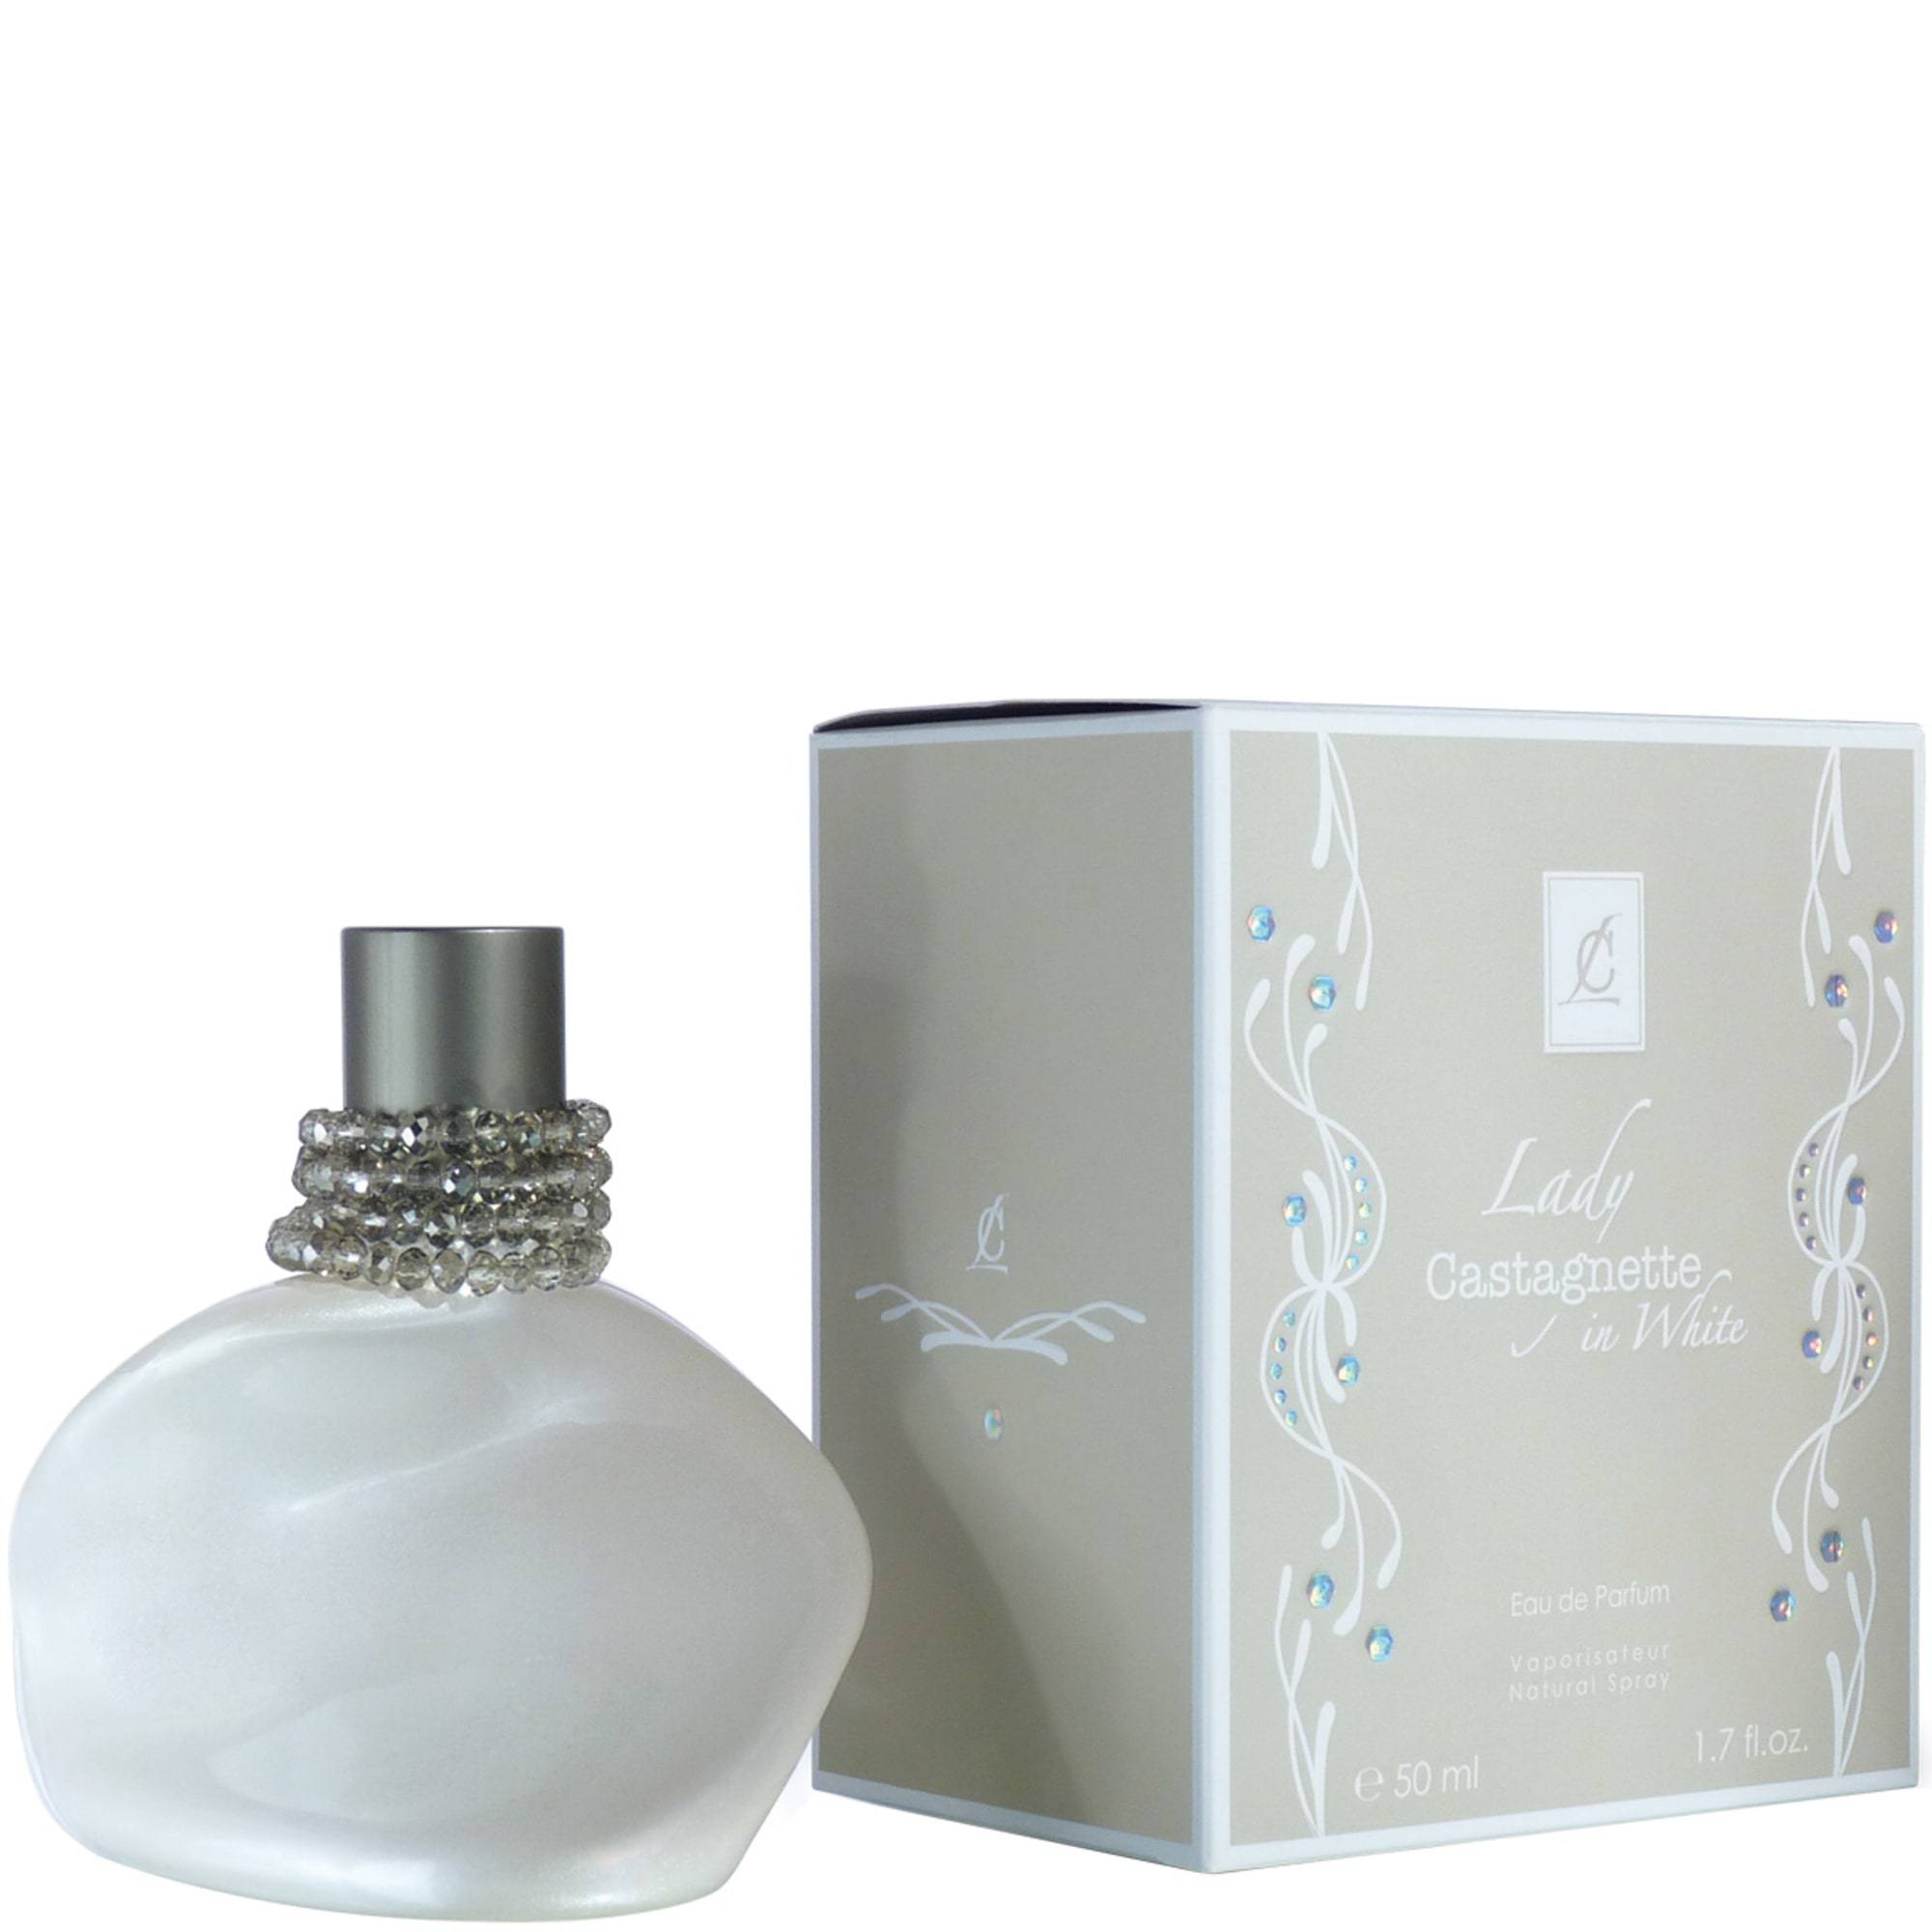 Lady castagnette in white. Парфюм Lady Castagnette. Парфюм Lulu Castagnette. Lulu Castagnette Lady Castagnette in White 100ml EDP. Парфюмерная вода Lulu Castagnette "Lady in White".